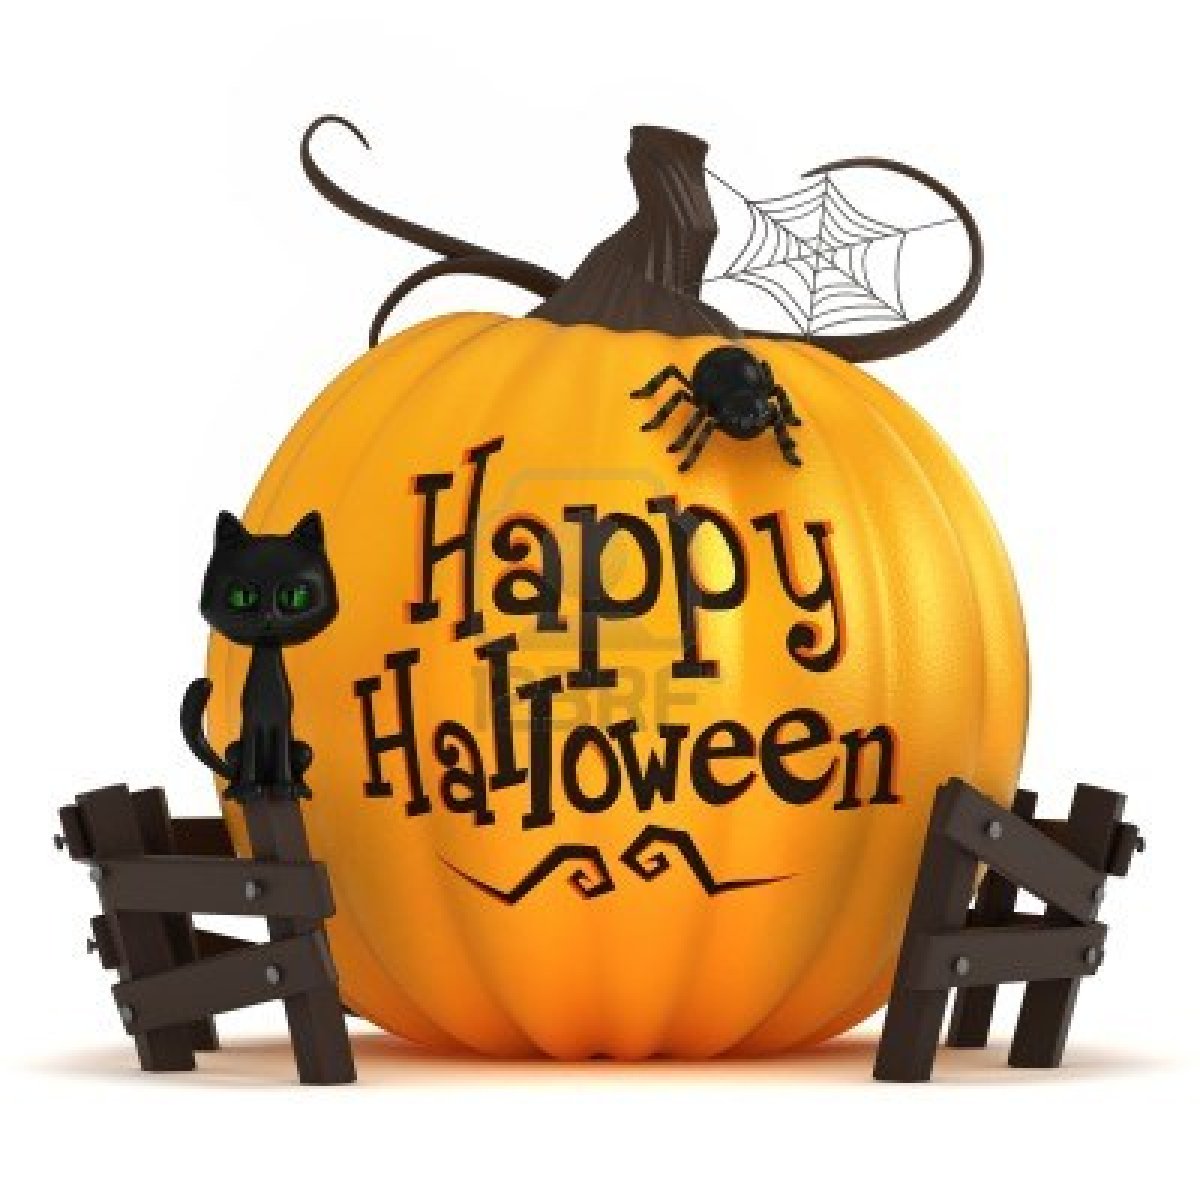 Say Boo and Scary on Halloween Day Messages Sayings